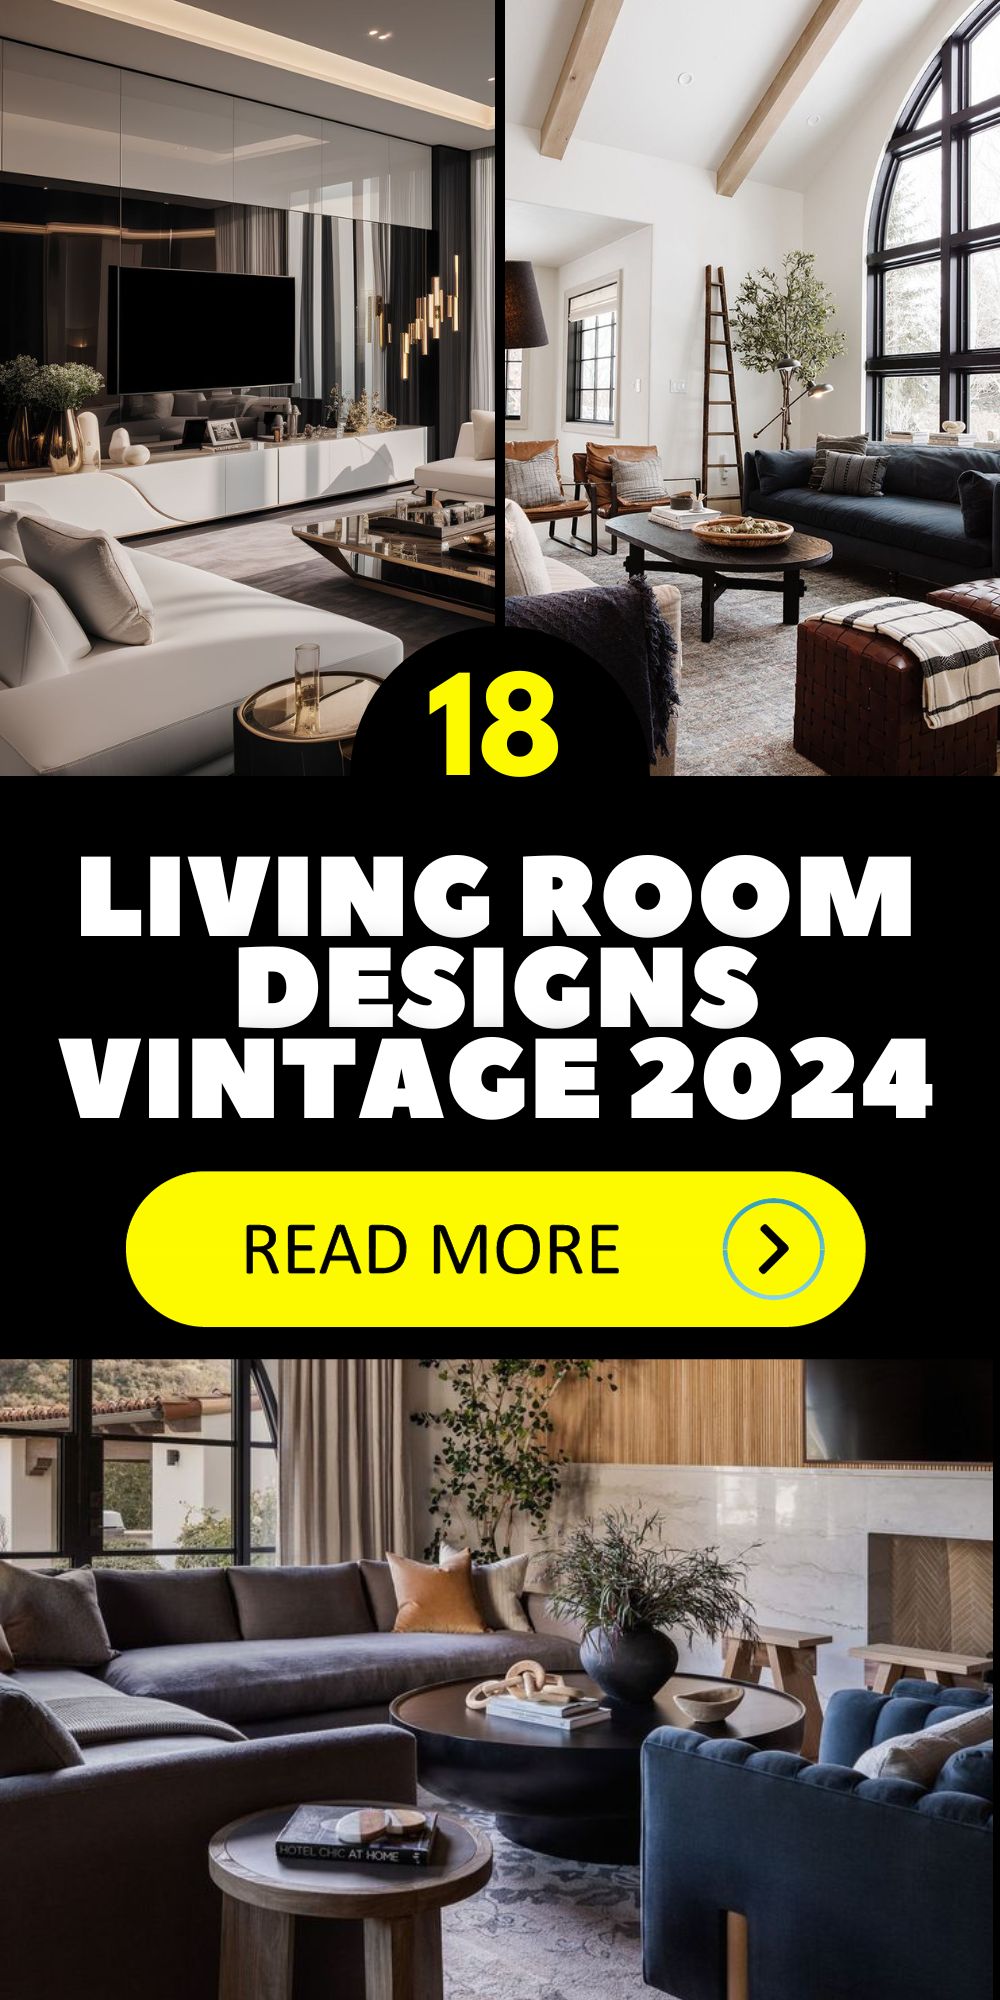 2024 Vintage Living Room Designs: Modern, Cozy, And Bohemian ...